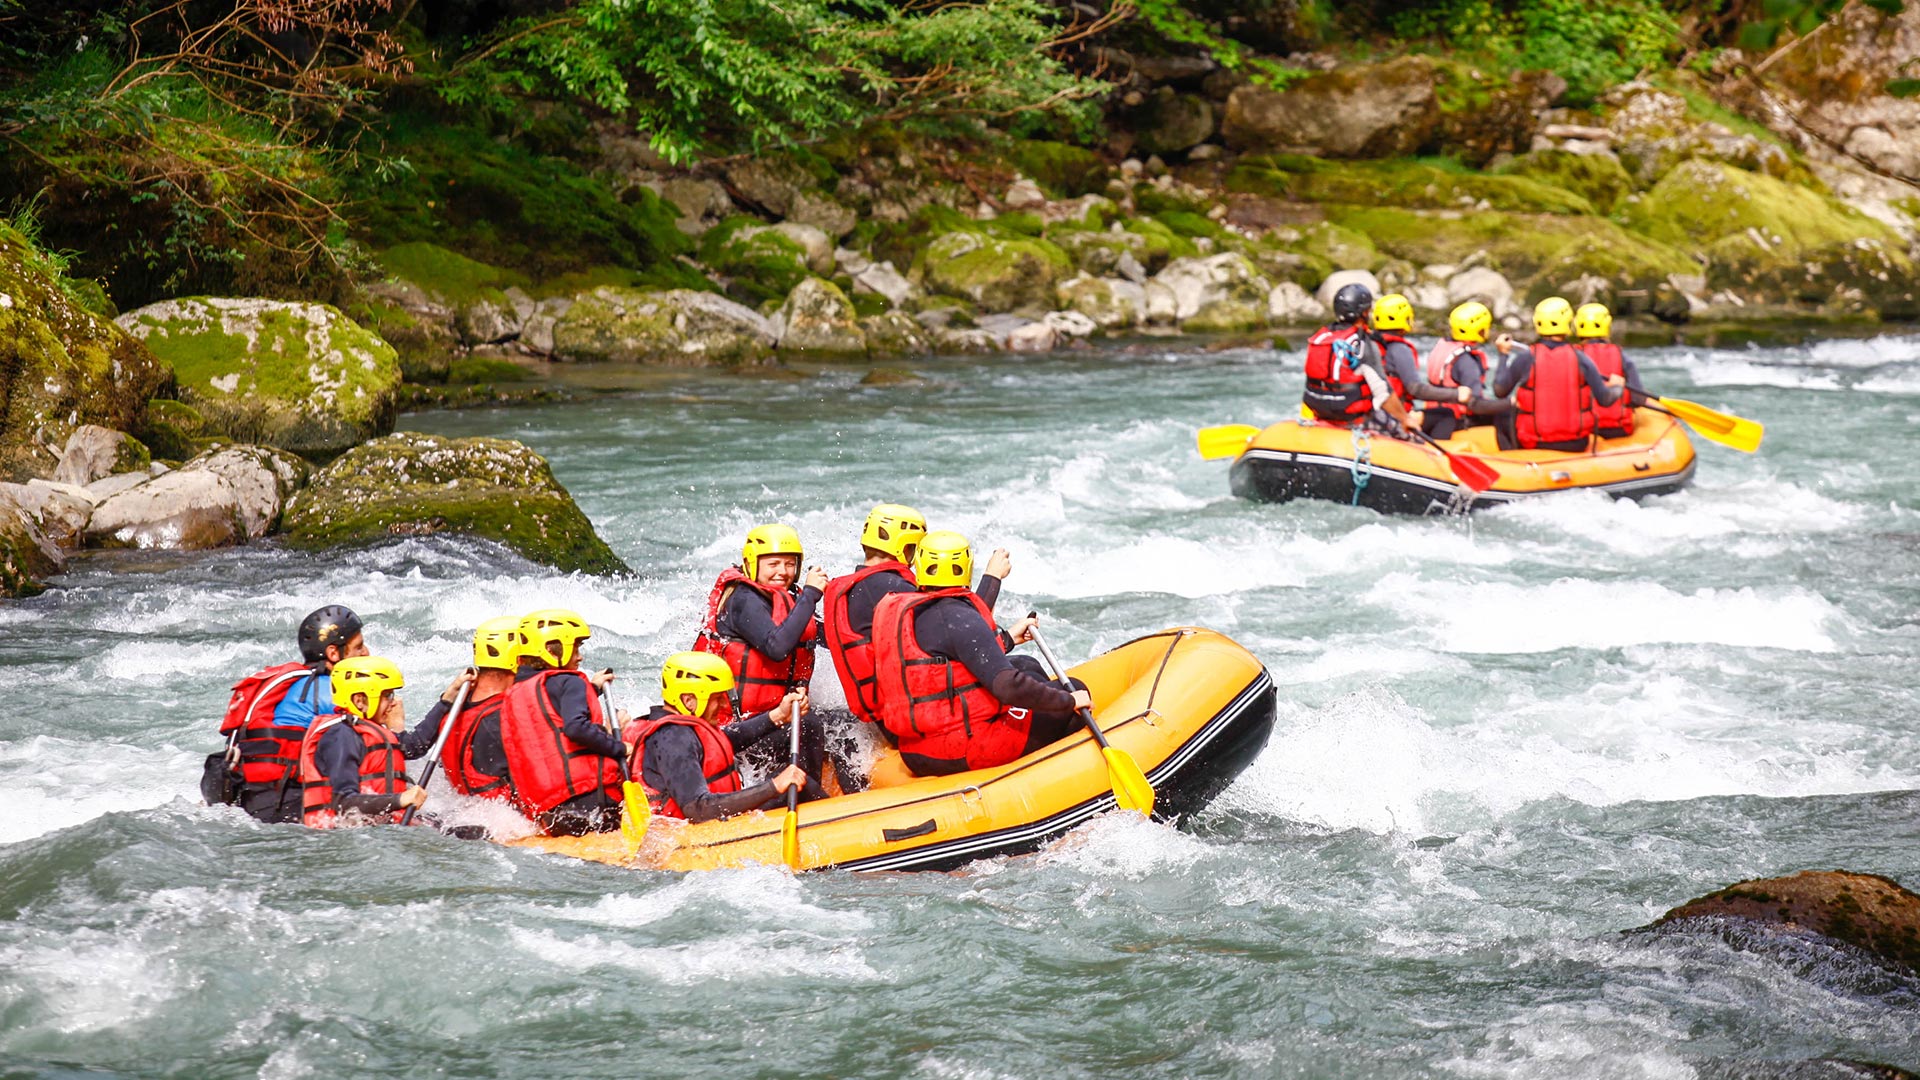 Whitewater Rafting from Tignes is exciting